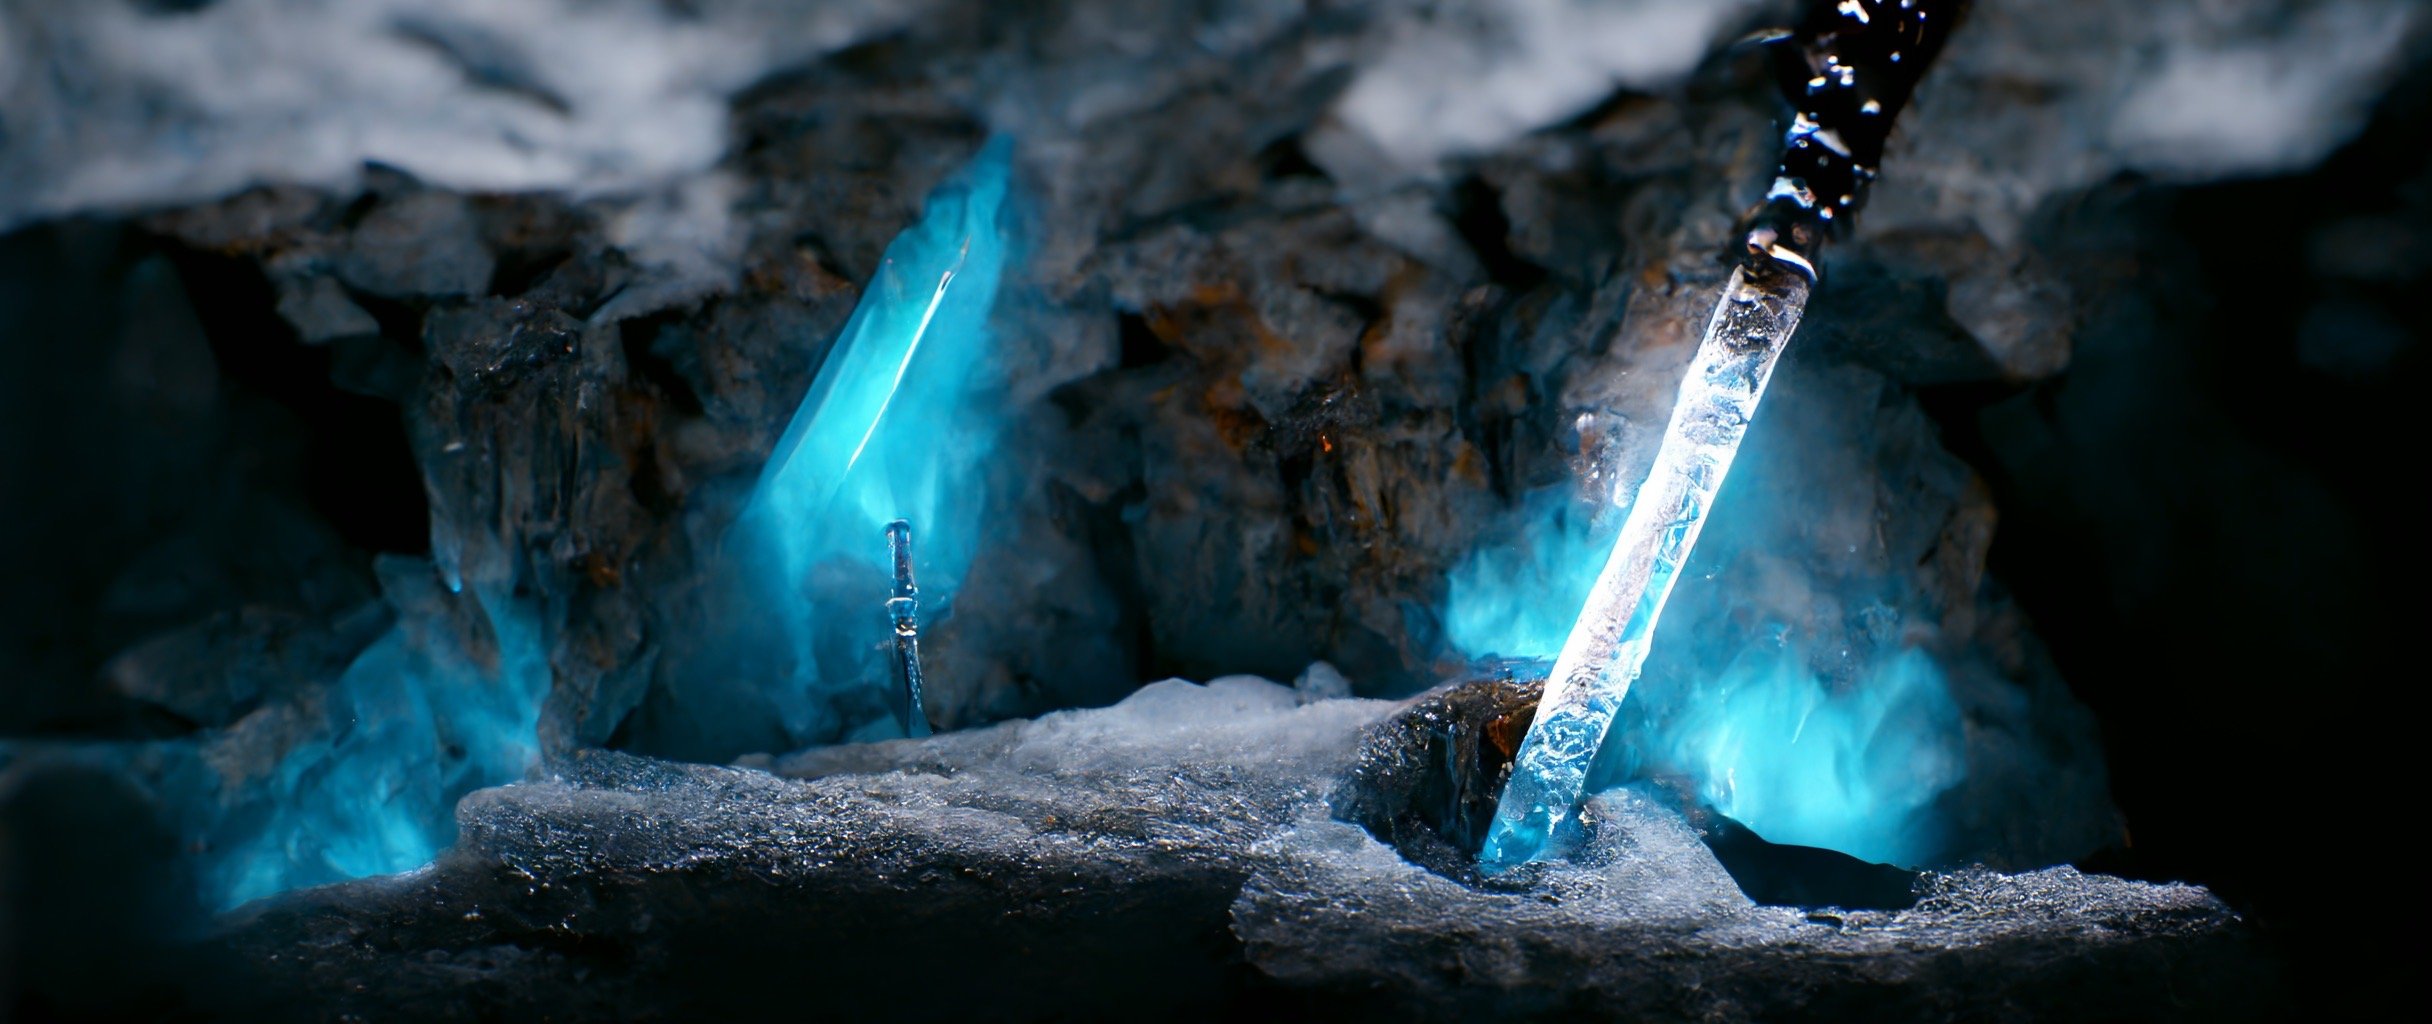 9408f42e-baf3-49cf-b76b-5ecb2a7190c4_S3RAPH_frozen_steal_Japanese_sword_katana_as_the_focal_point._in_an_ice_cave_with_reflective_crystals._one_.JPG